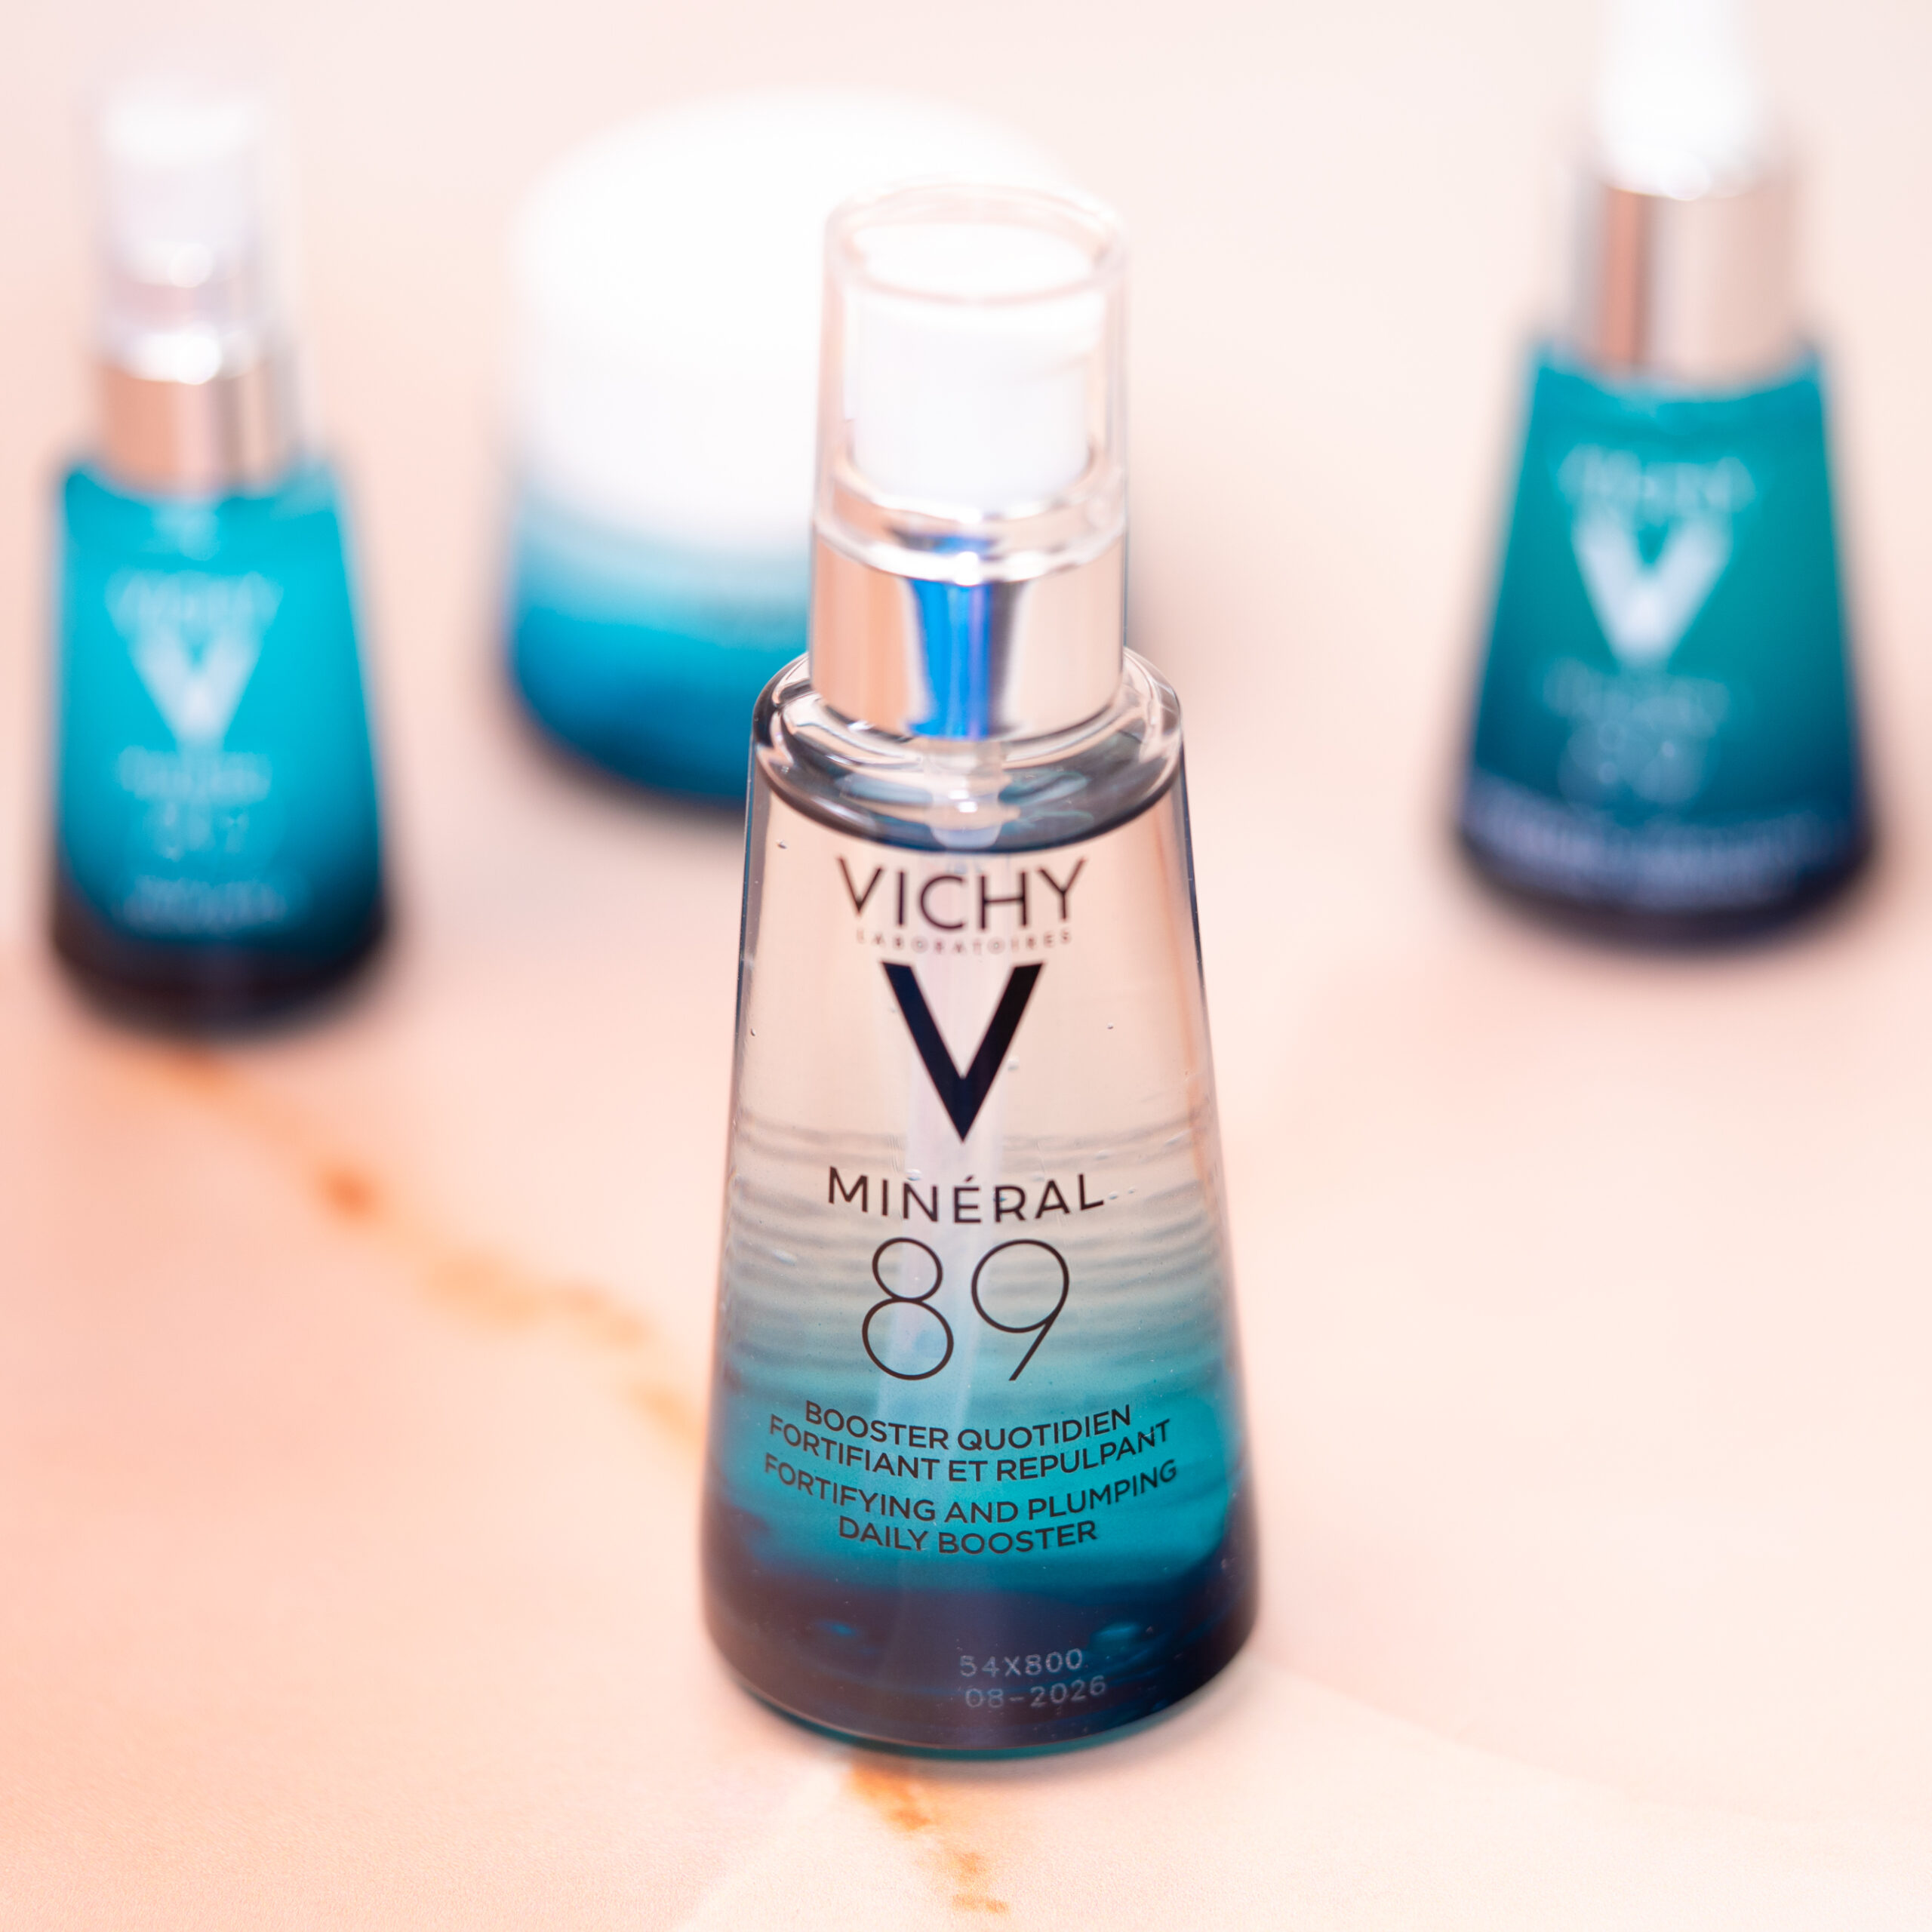 Vichy Mineral 89 – The Full Collection